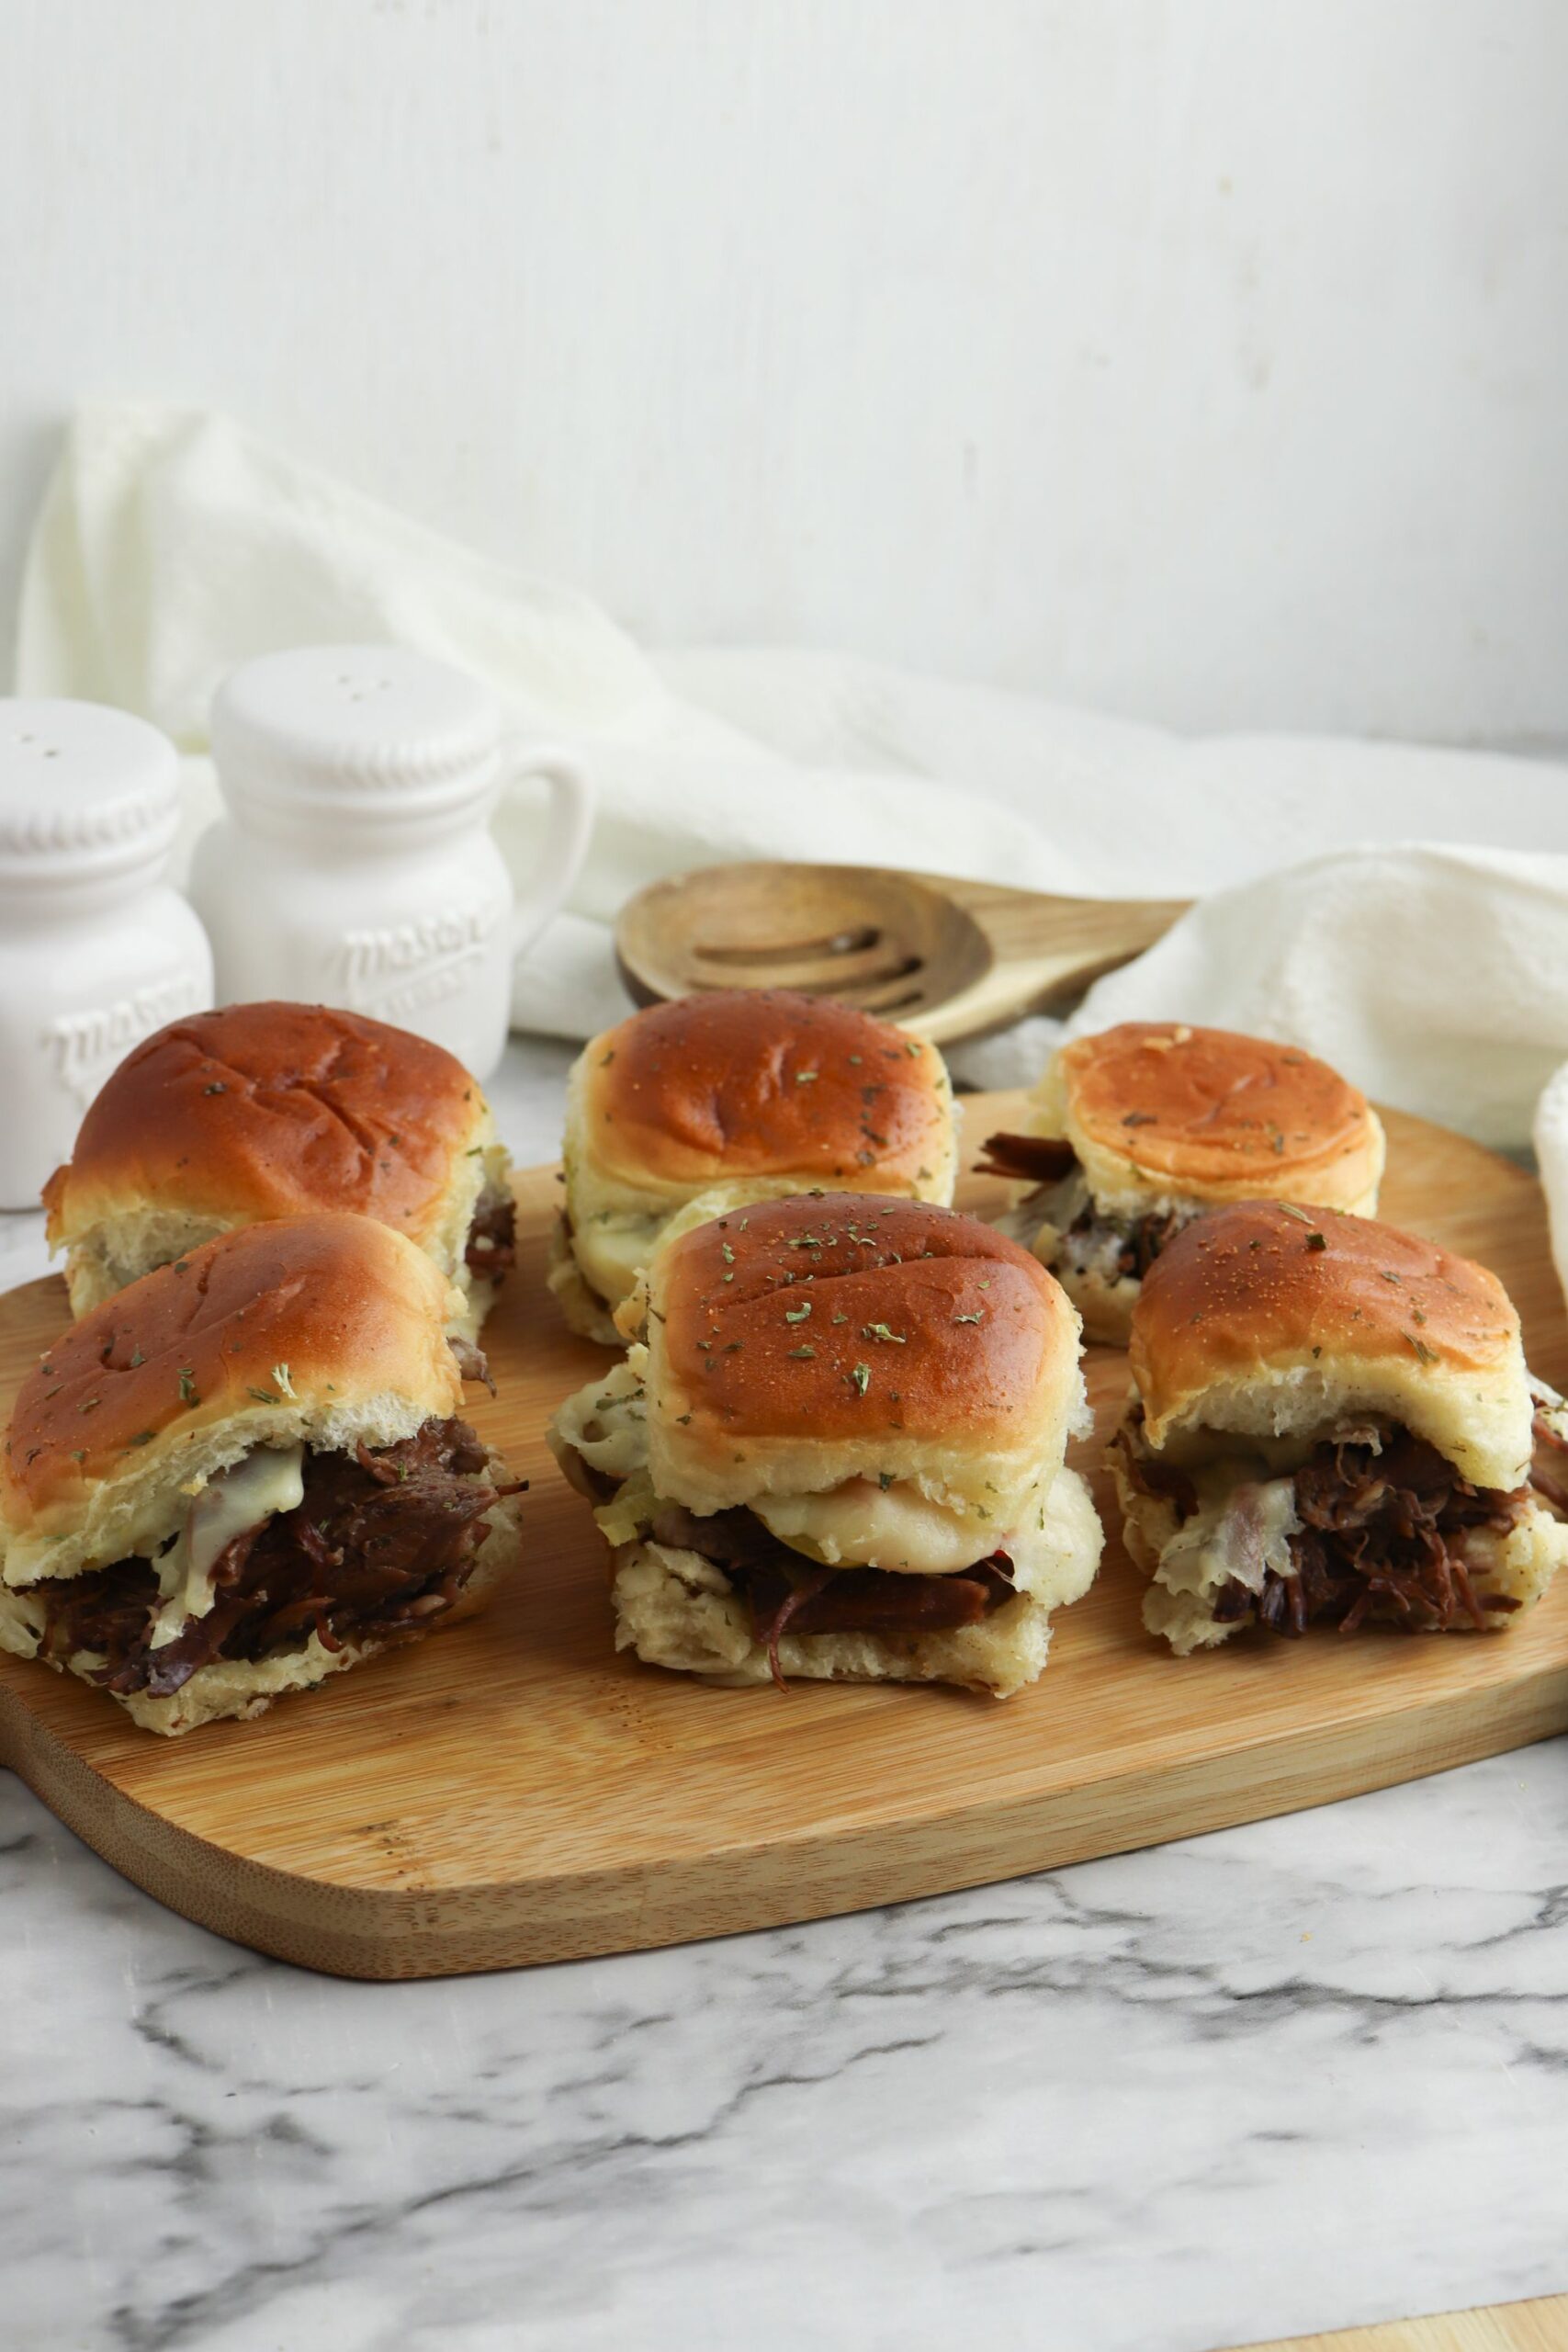 A cutting board full of the sliders.